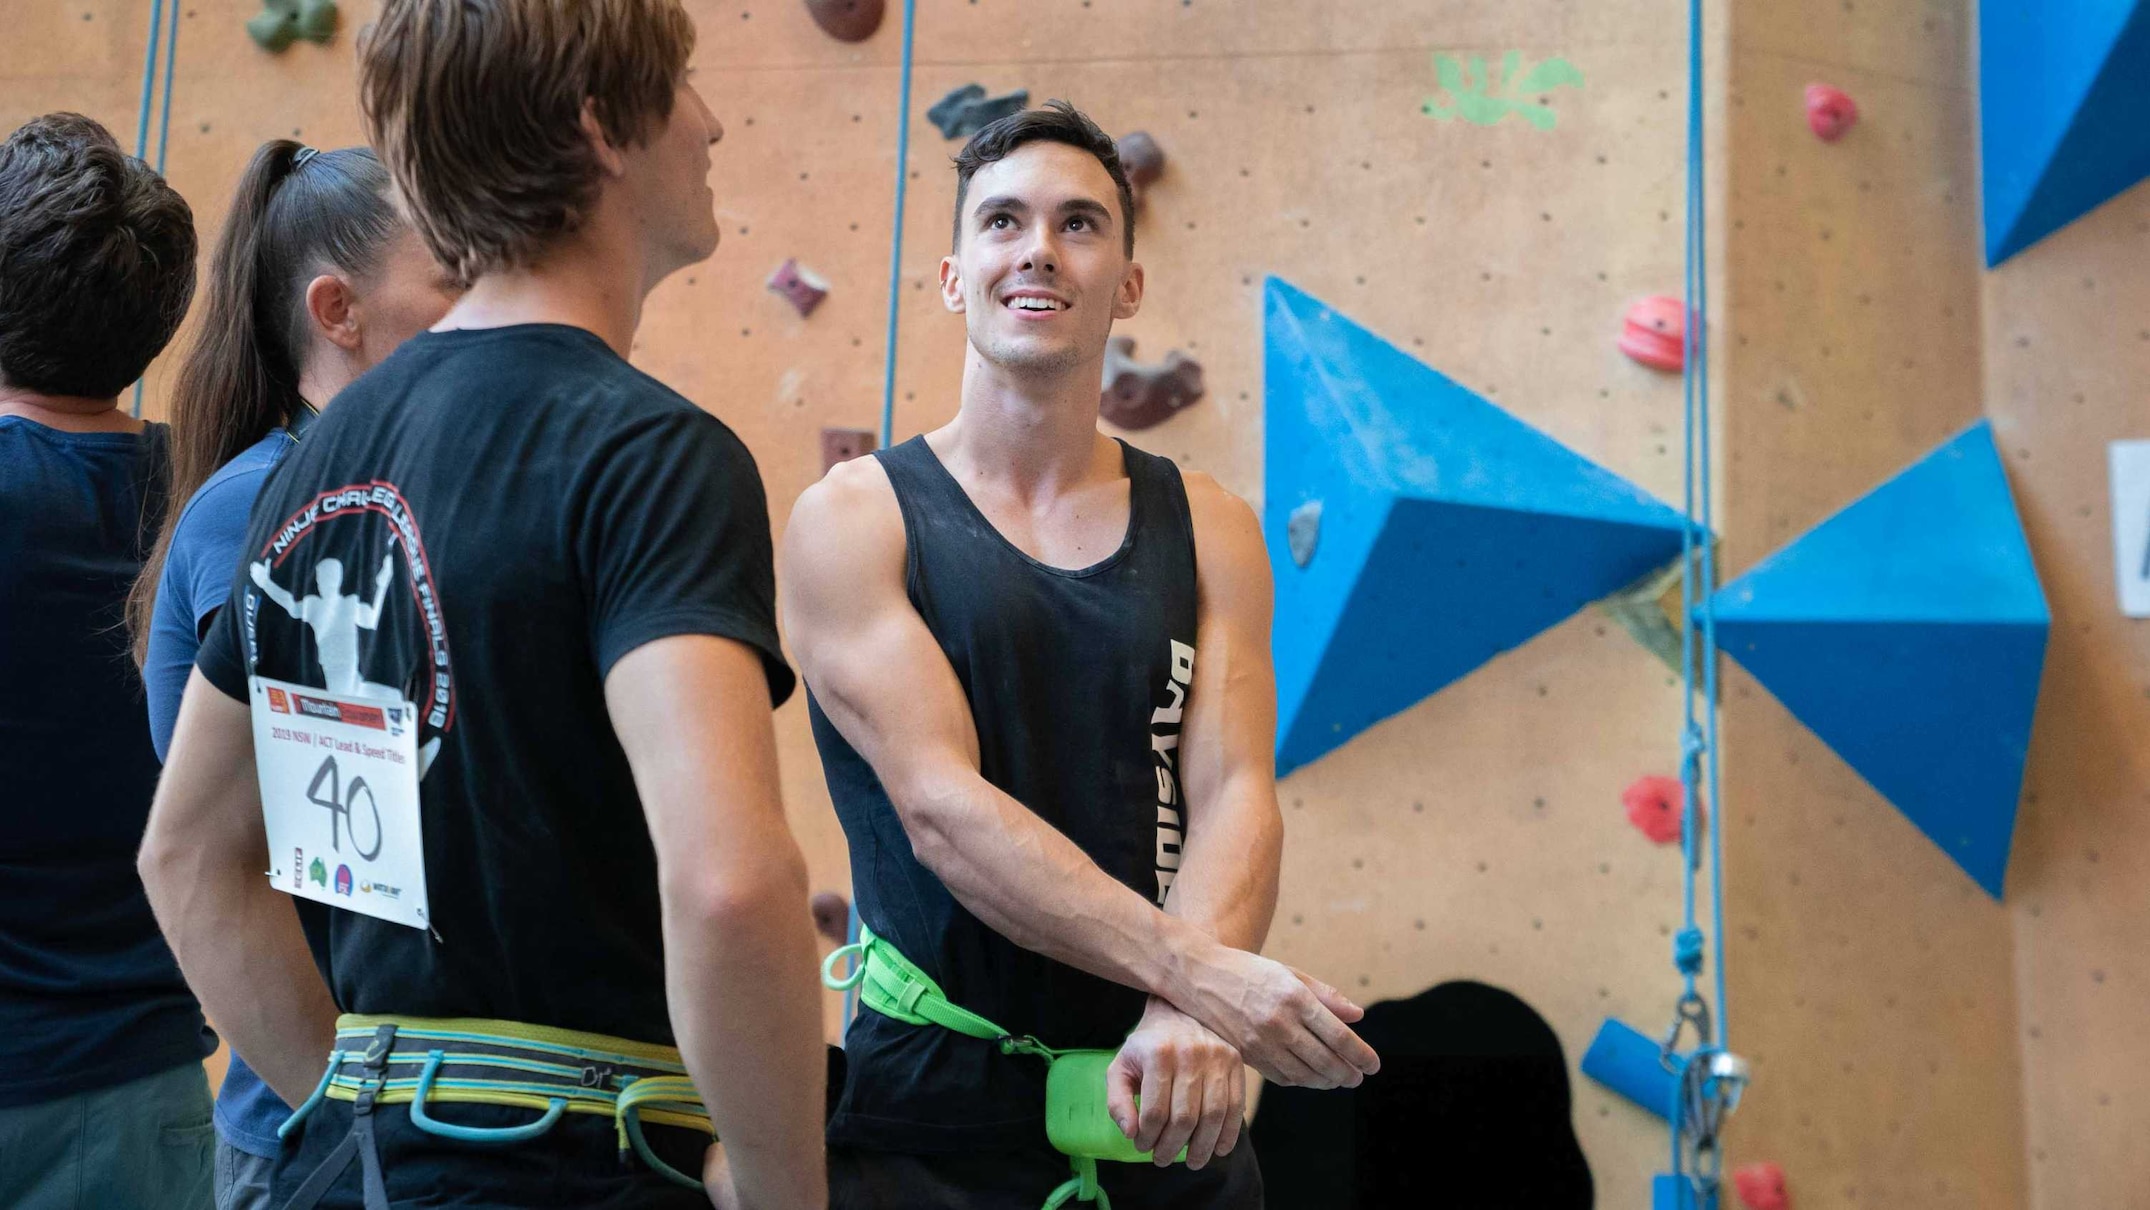 pay day with campbell harrison: even as a champion sport climber heading to the olympics, 'there's not a lot of wiggle room'